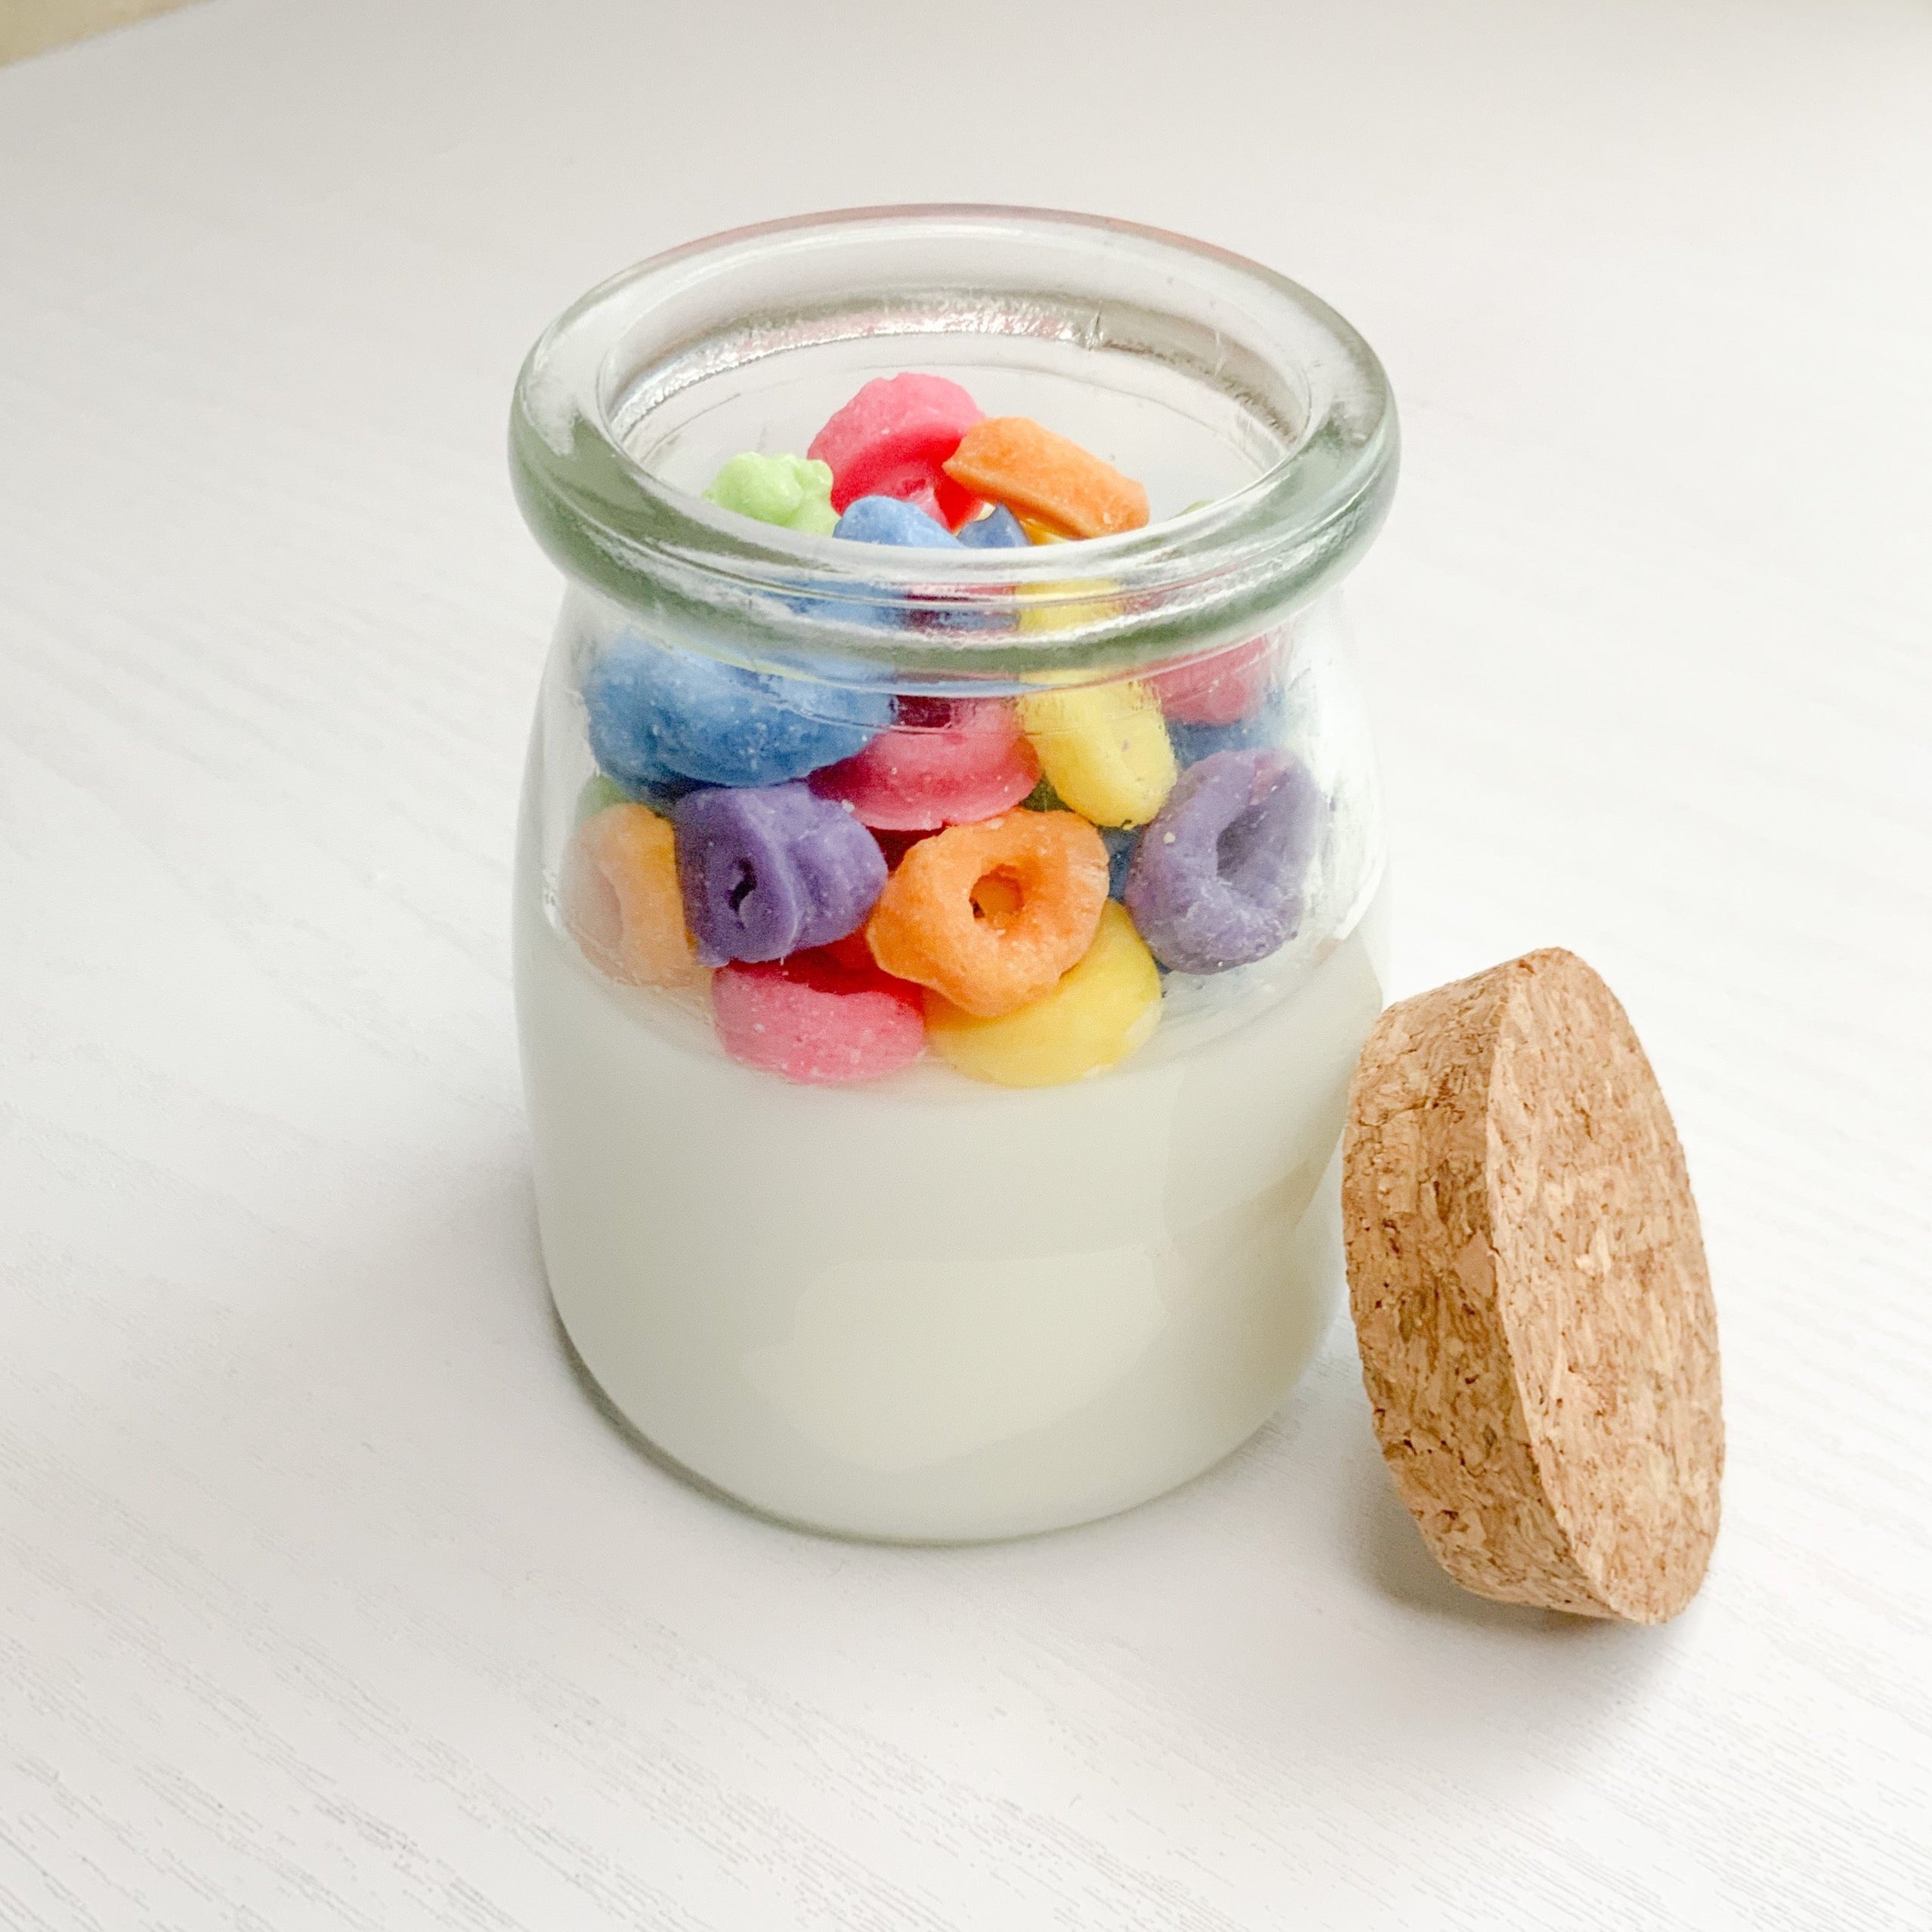 Cereal Candle (No Wick)